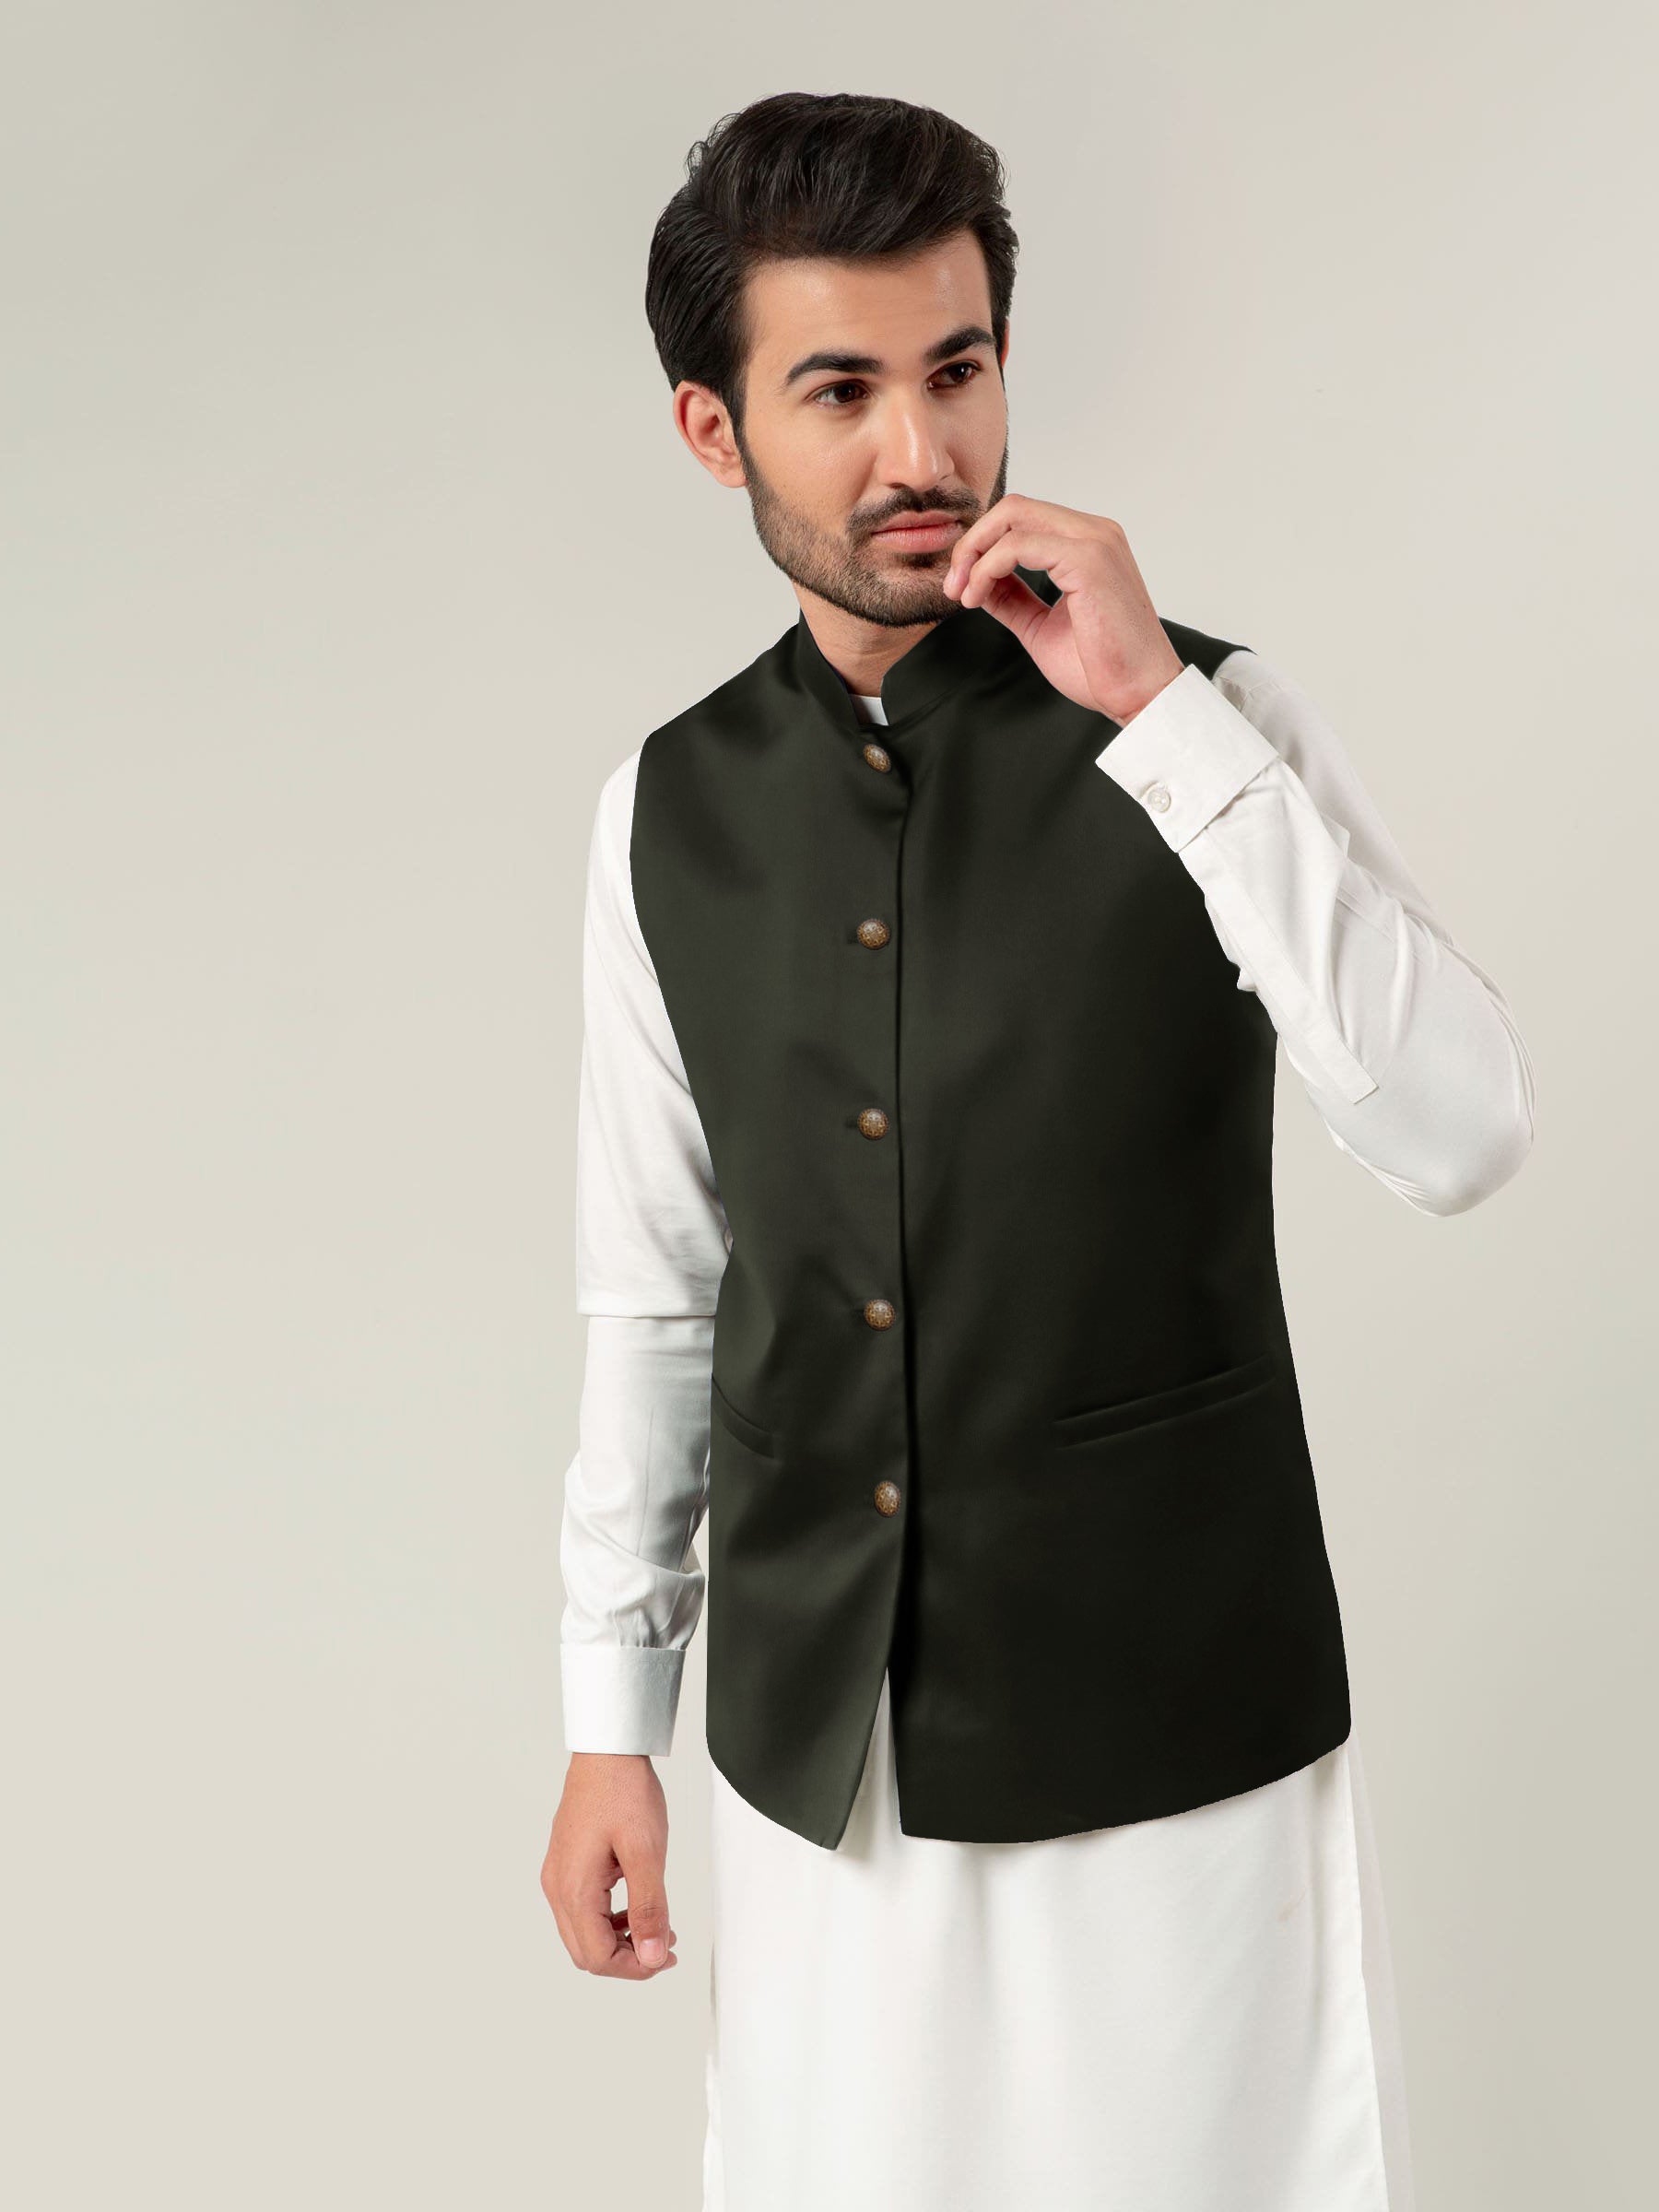 Classic Traditional Waistcoat For Men-Dark Olive-SP1695